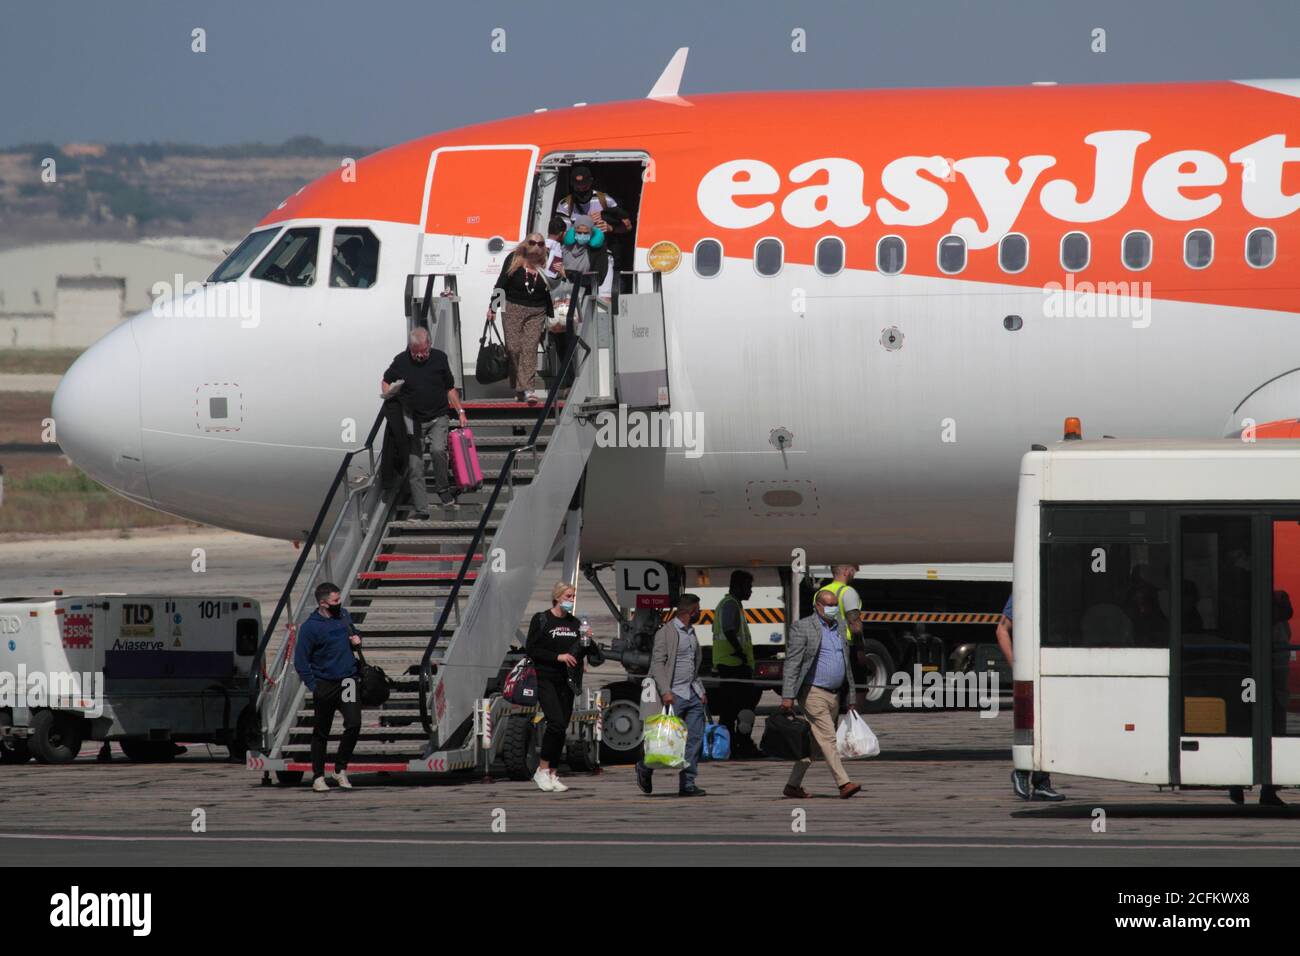 Passengers wearing facemasks disembarking from an easyJet Airbus A320neo jet plane in Malta. Impact of COVID-19 coronavirus on air travel. Stock Photo